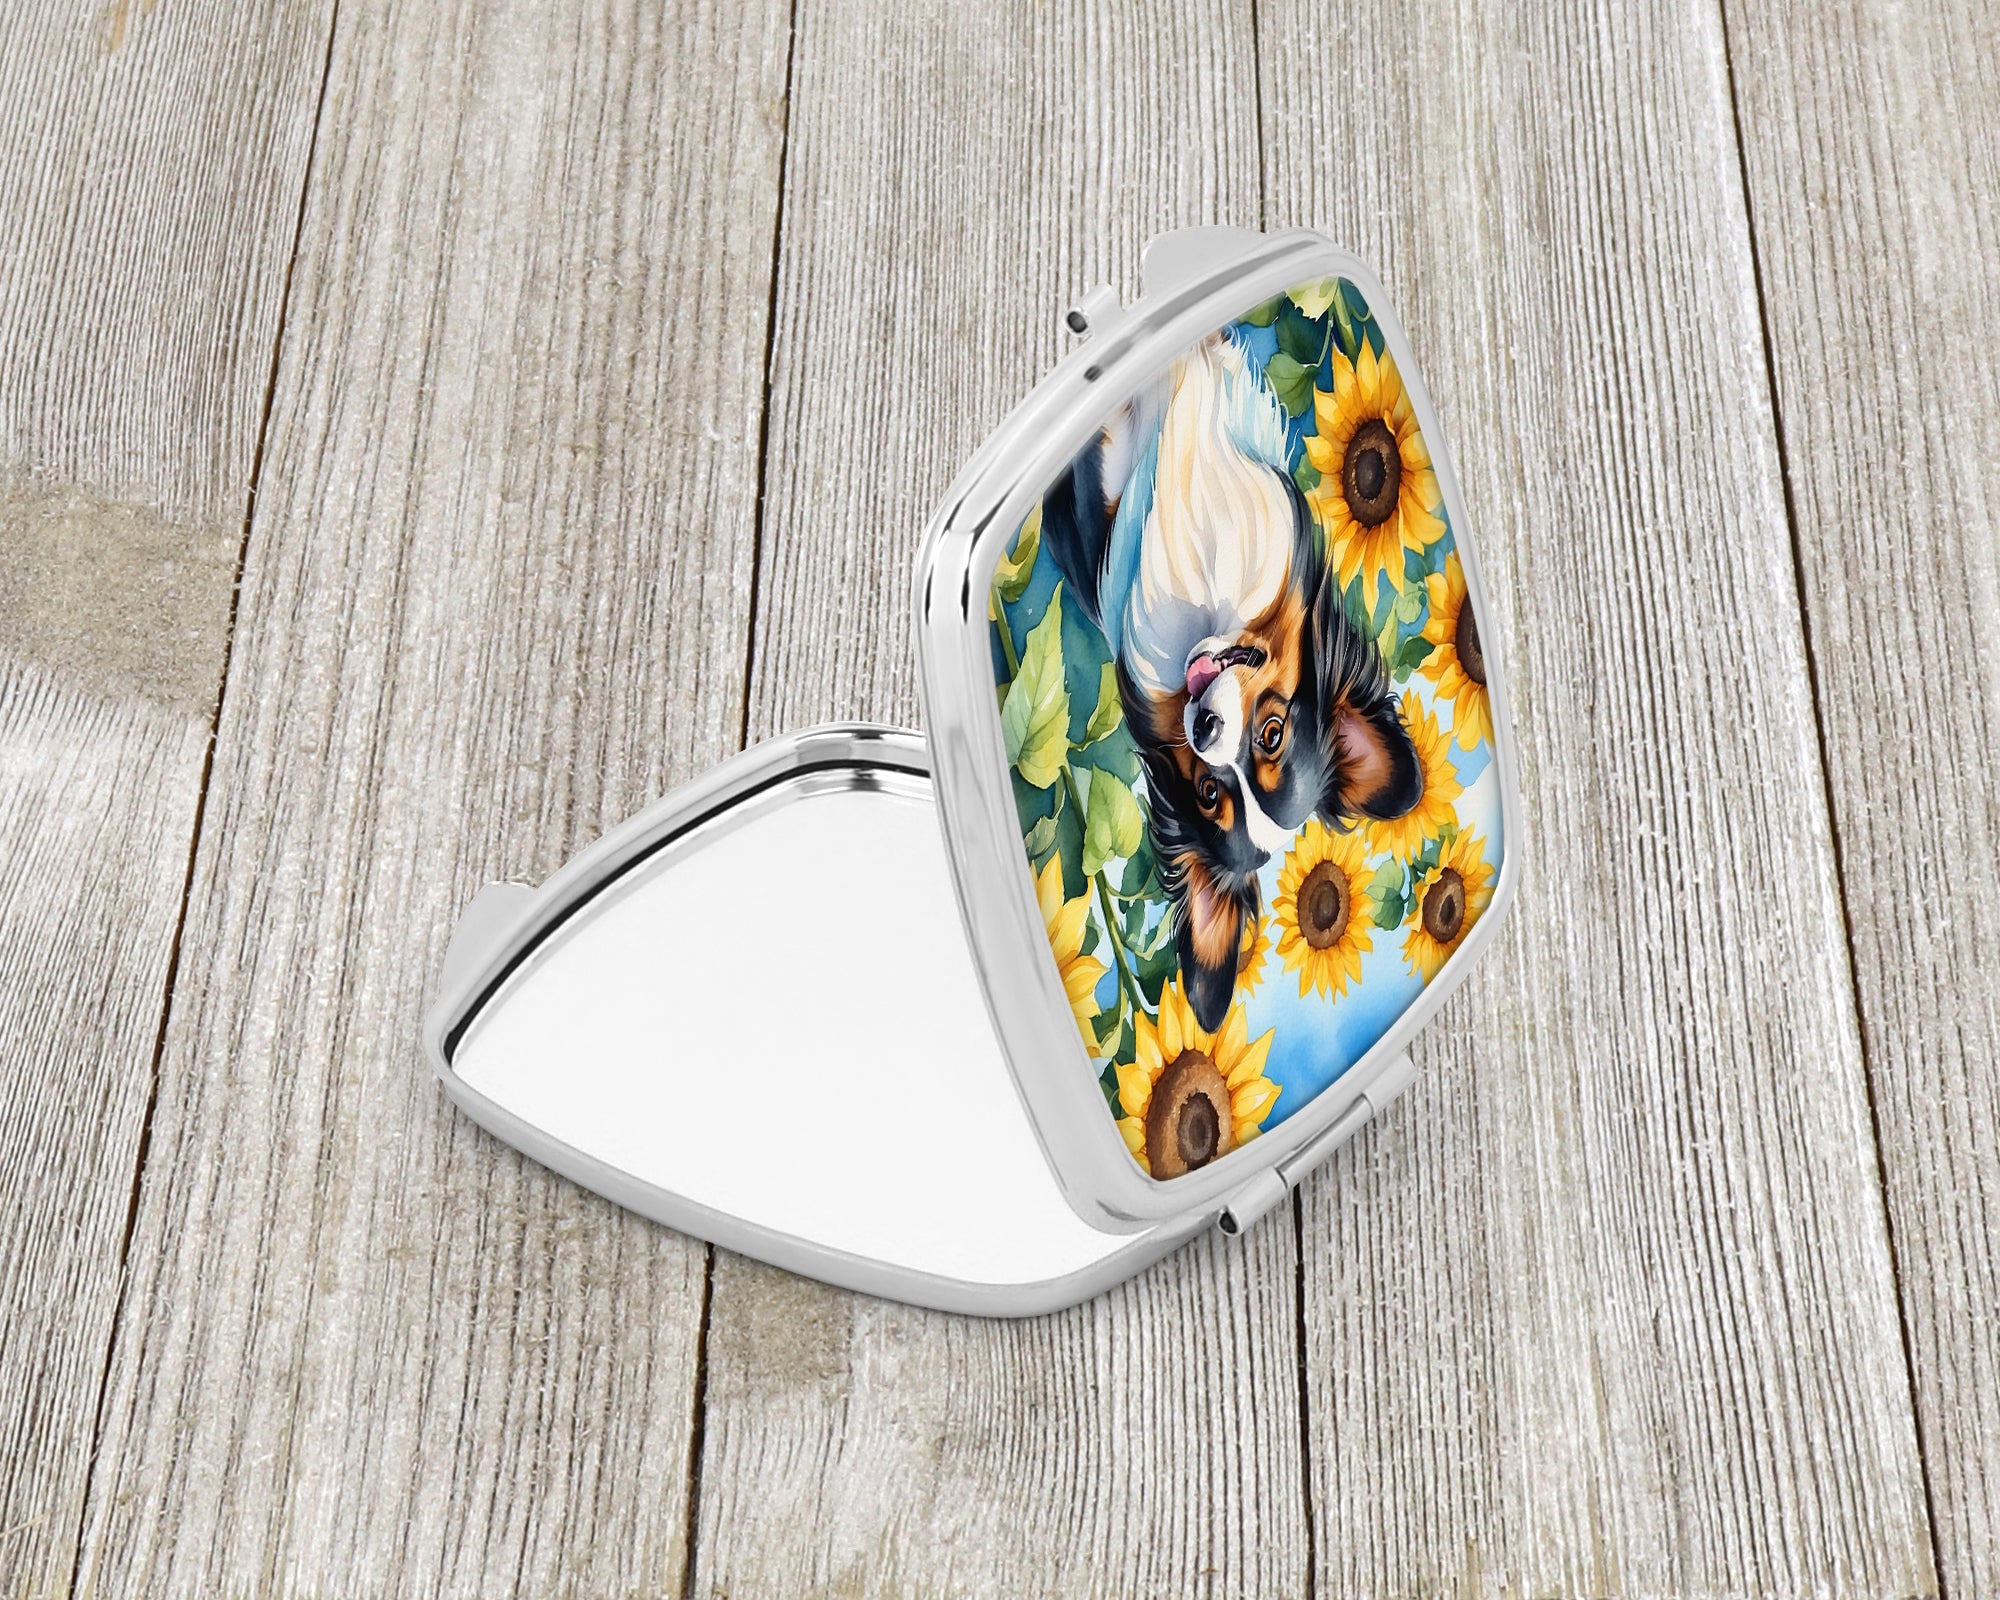 Buy this Papillon in Sunflowers Compact Mirror